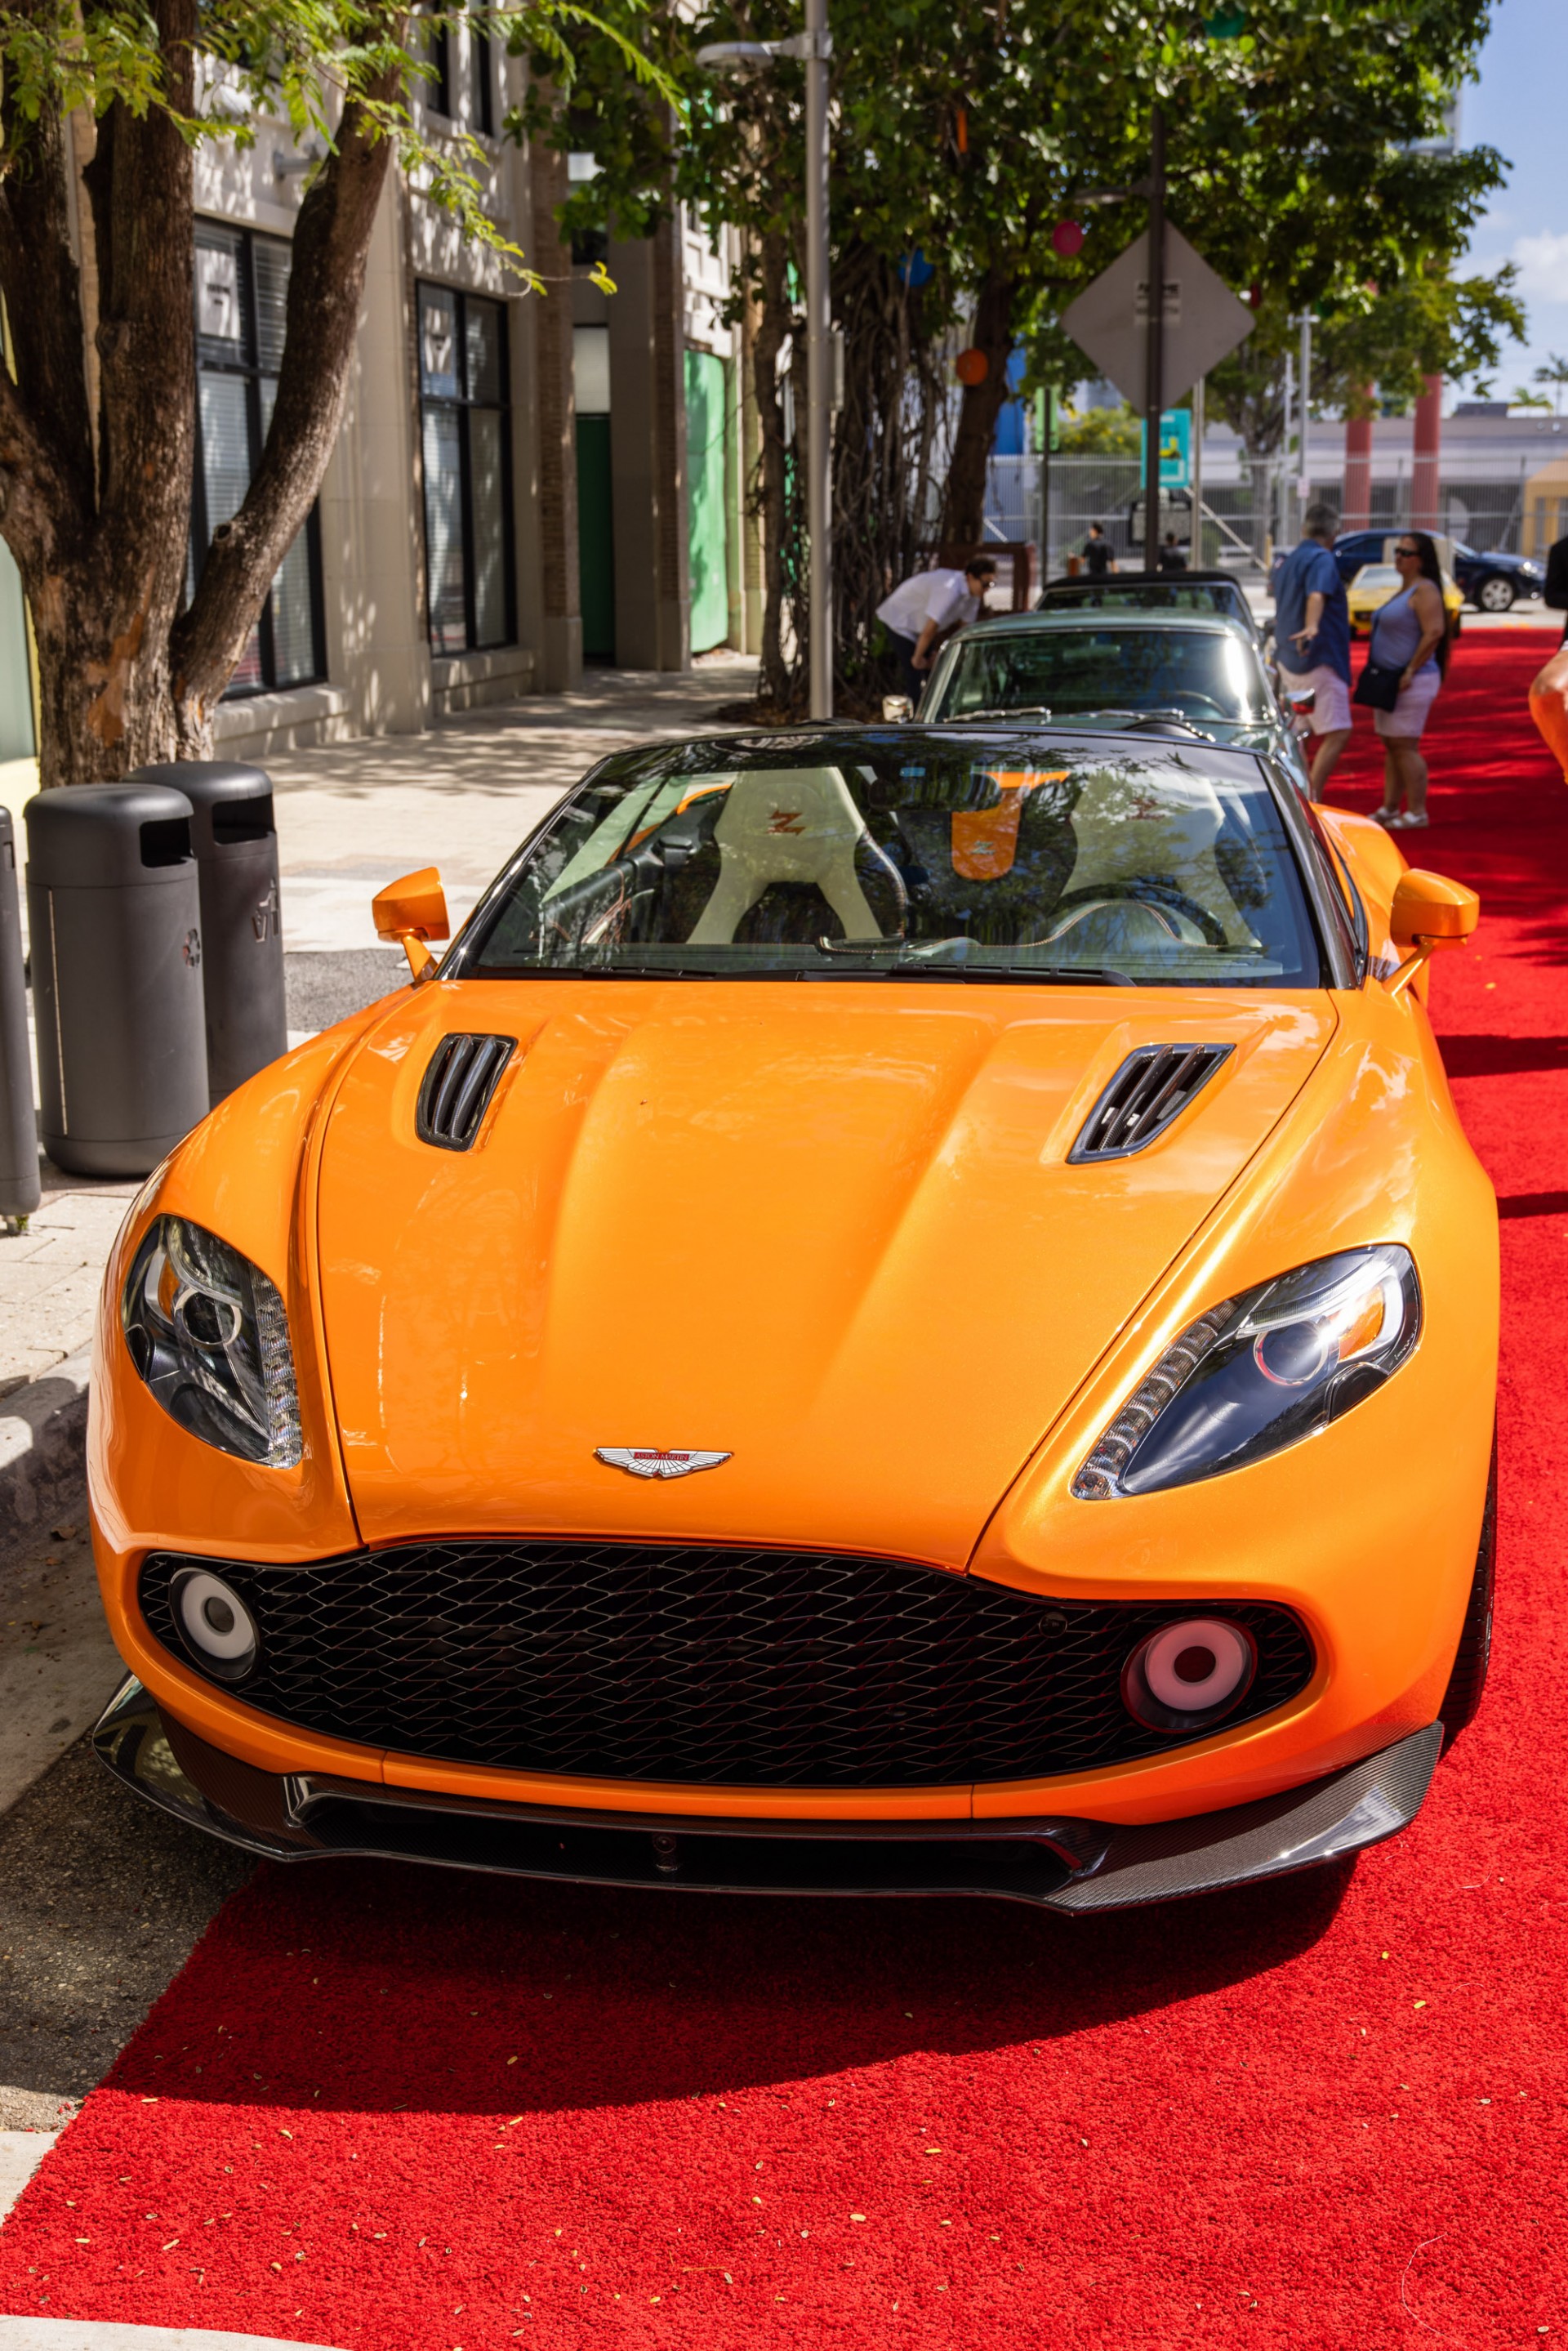 The Sixth Annual Miami Concours